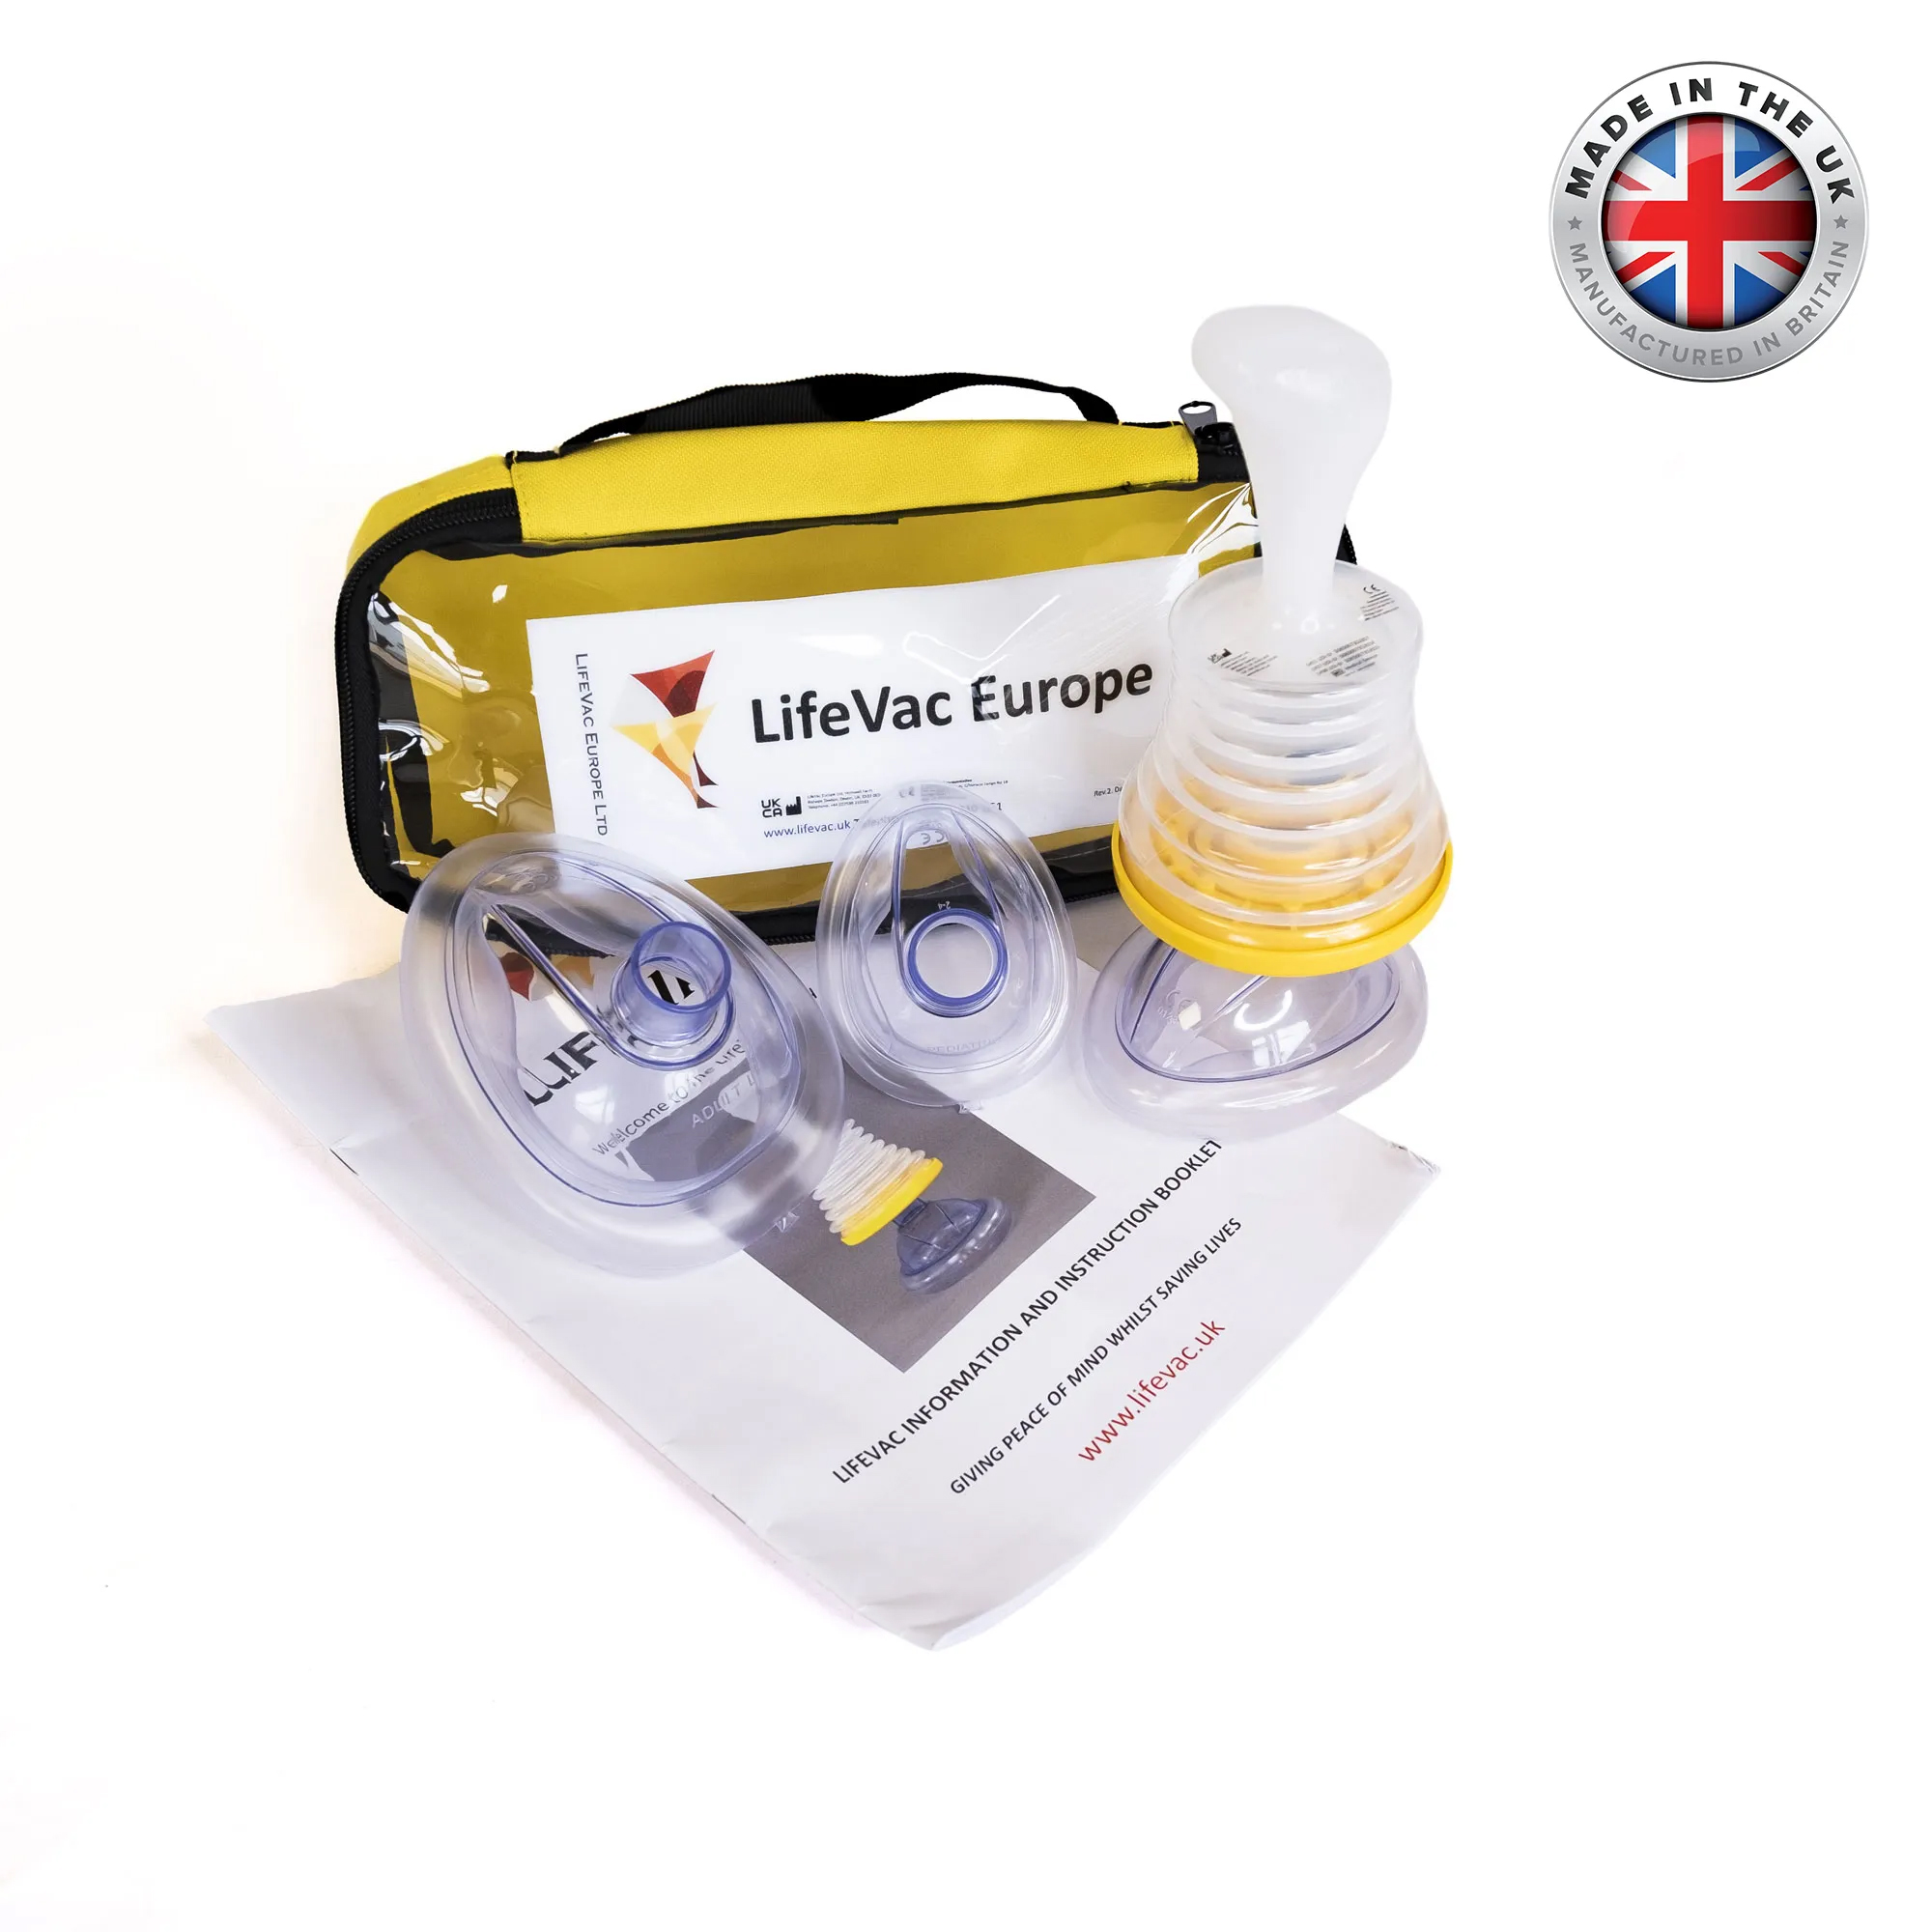 LifeVac - Choking Rescue Device Standard Kit for Adult and